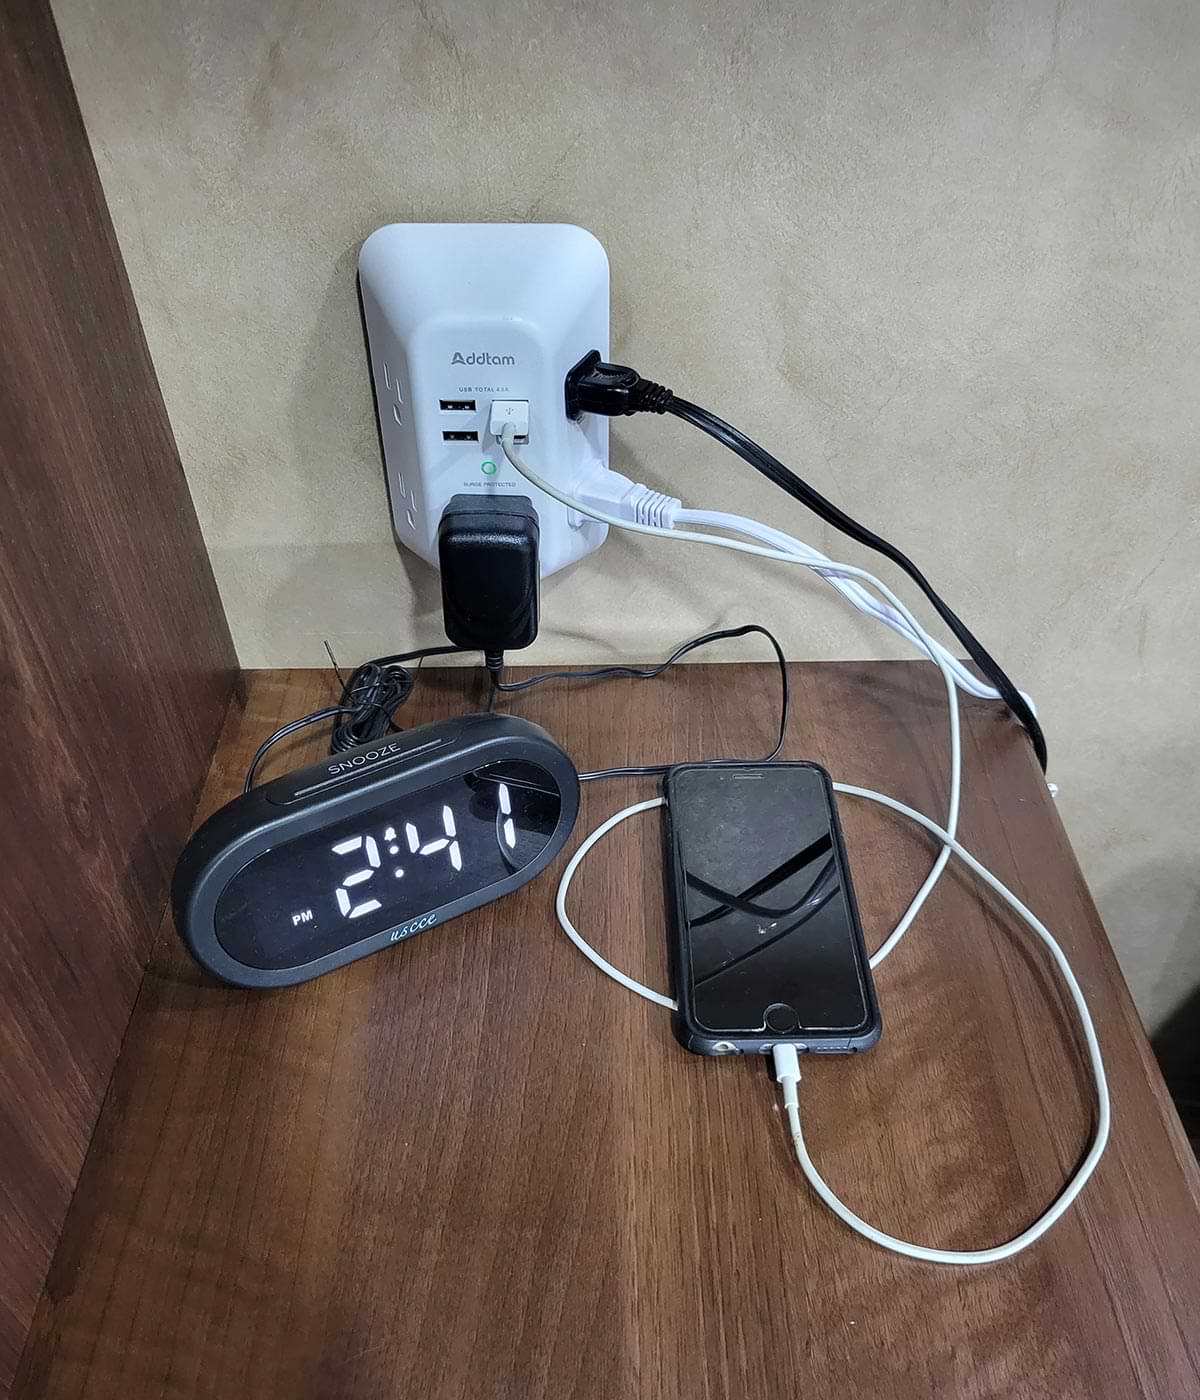 an Addtam wall charger installed at a bedside outlet and connected to a digital alarm clock and smartphone